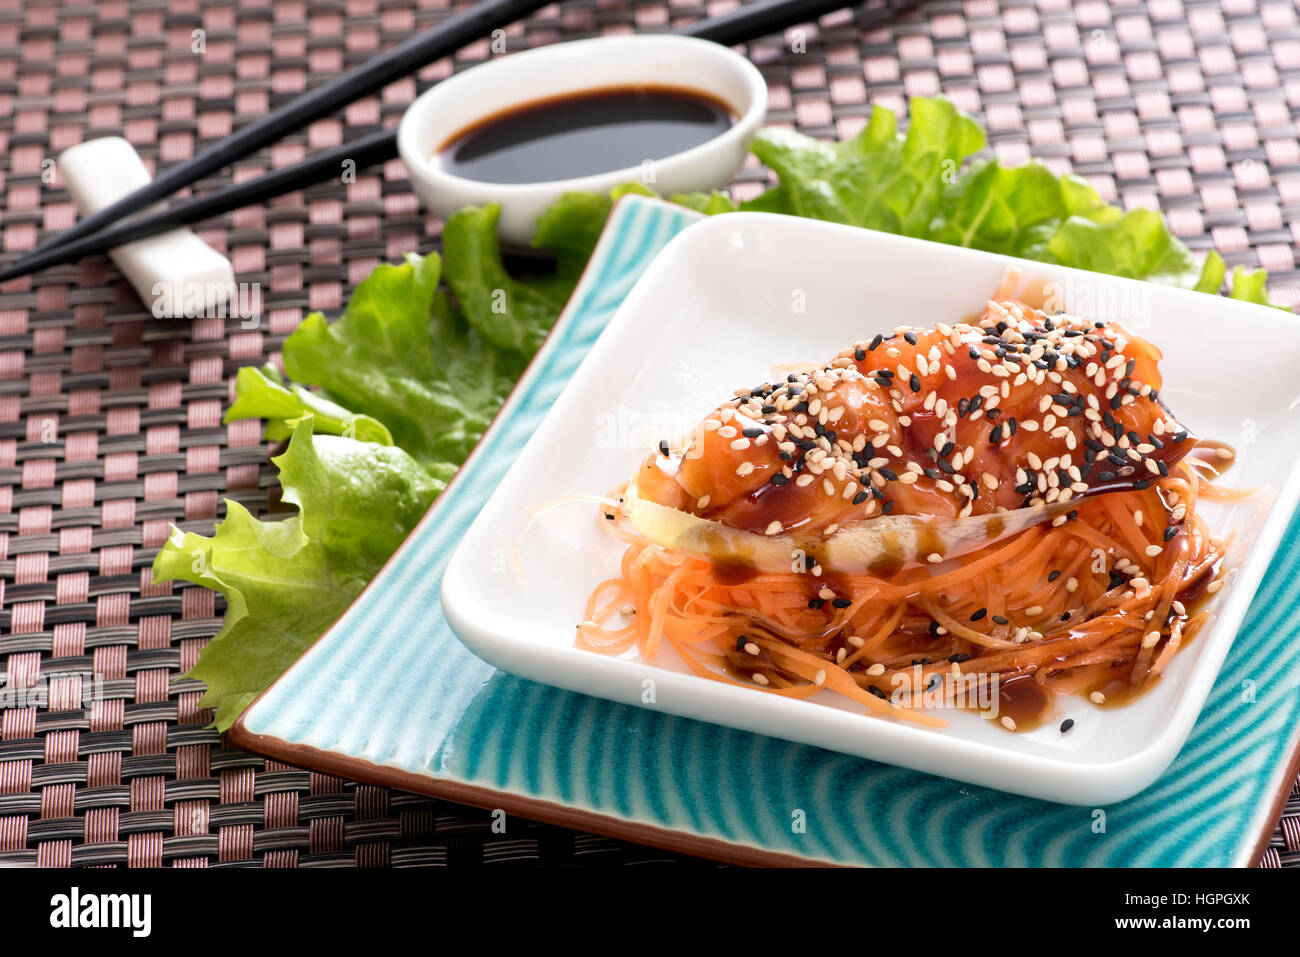 Close up view of white plate with salmon in tartare served with soy sauce and lettuce in asian restaurant Stock Photo